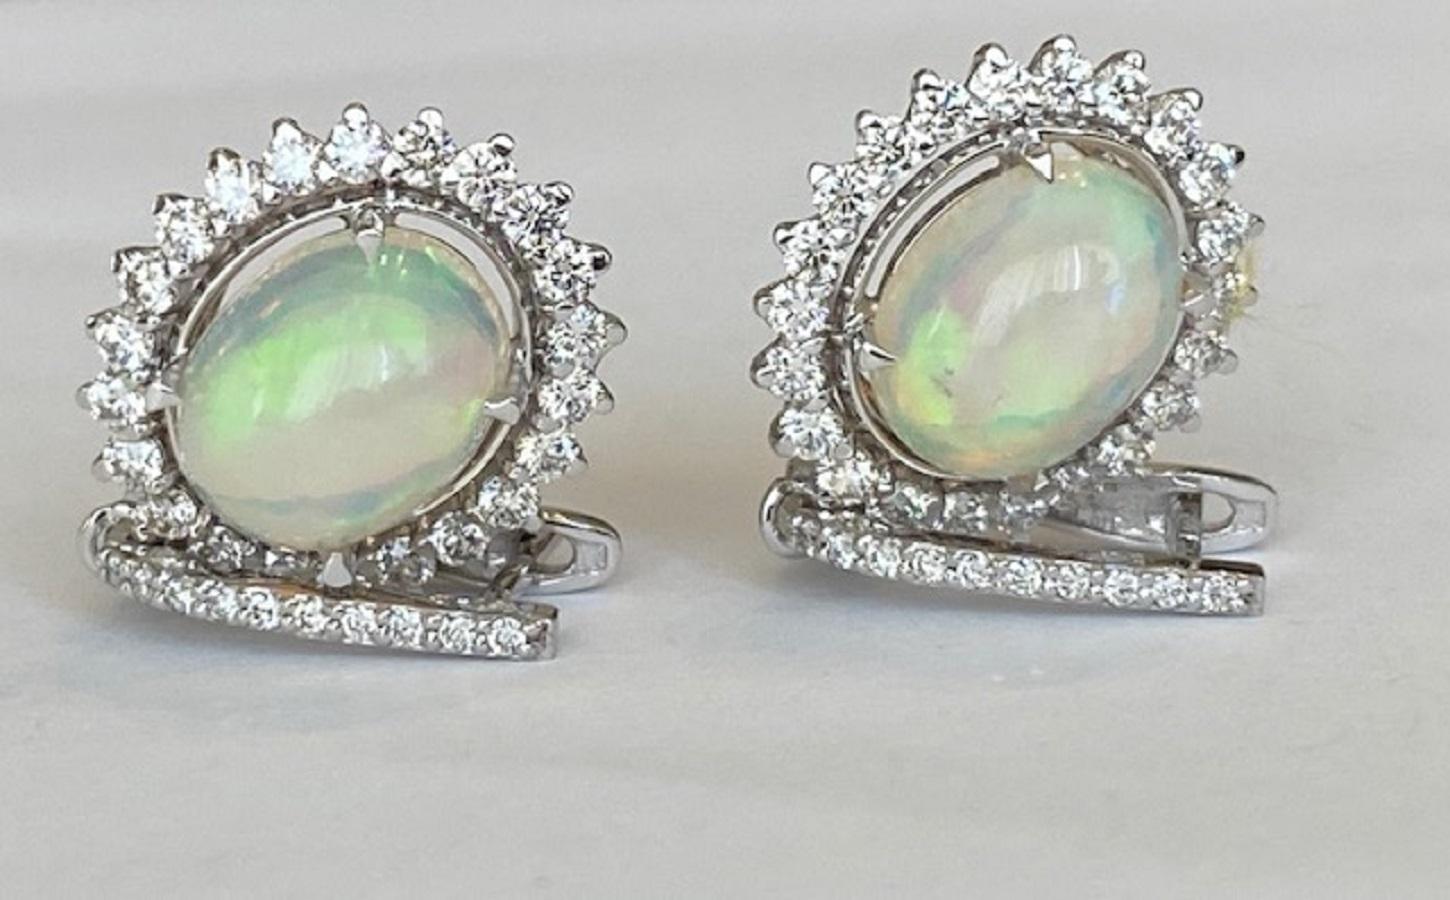 Contemporary 18 Kt. White Gold Earrings with 4.15 Ct Opals and Diamonds